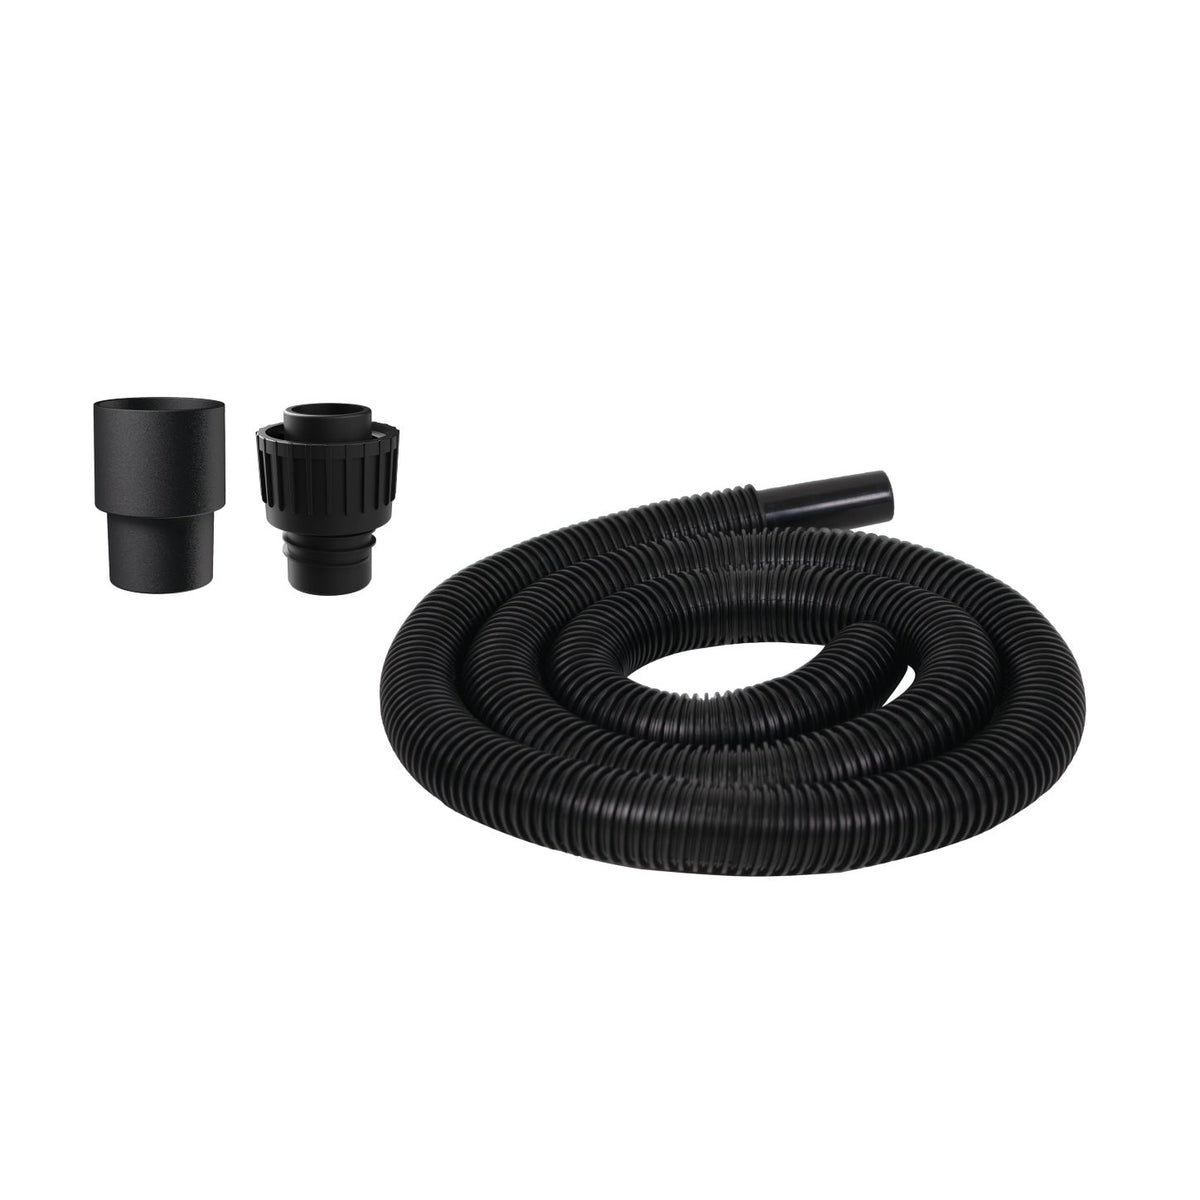 STEALTH 1-1/4-IN X 8-FT VAC HOSE with 2 hose ends